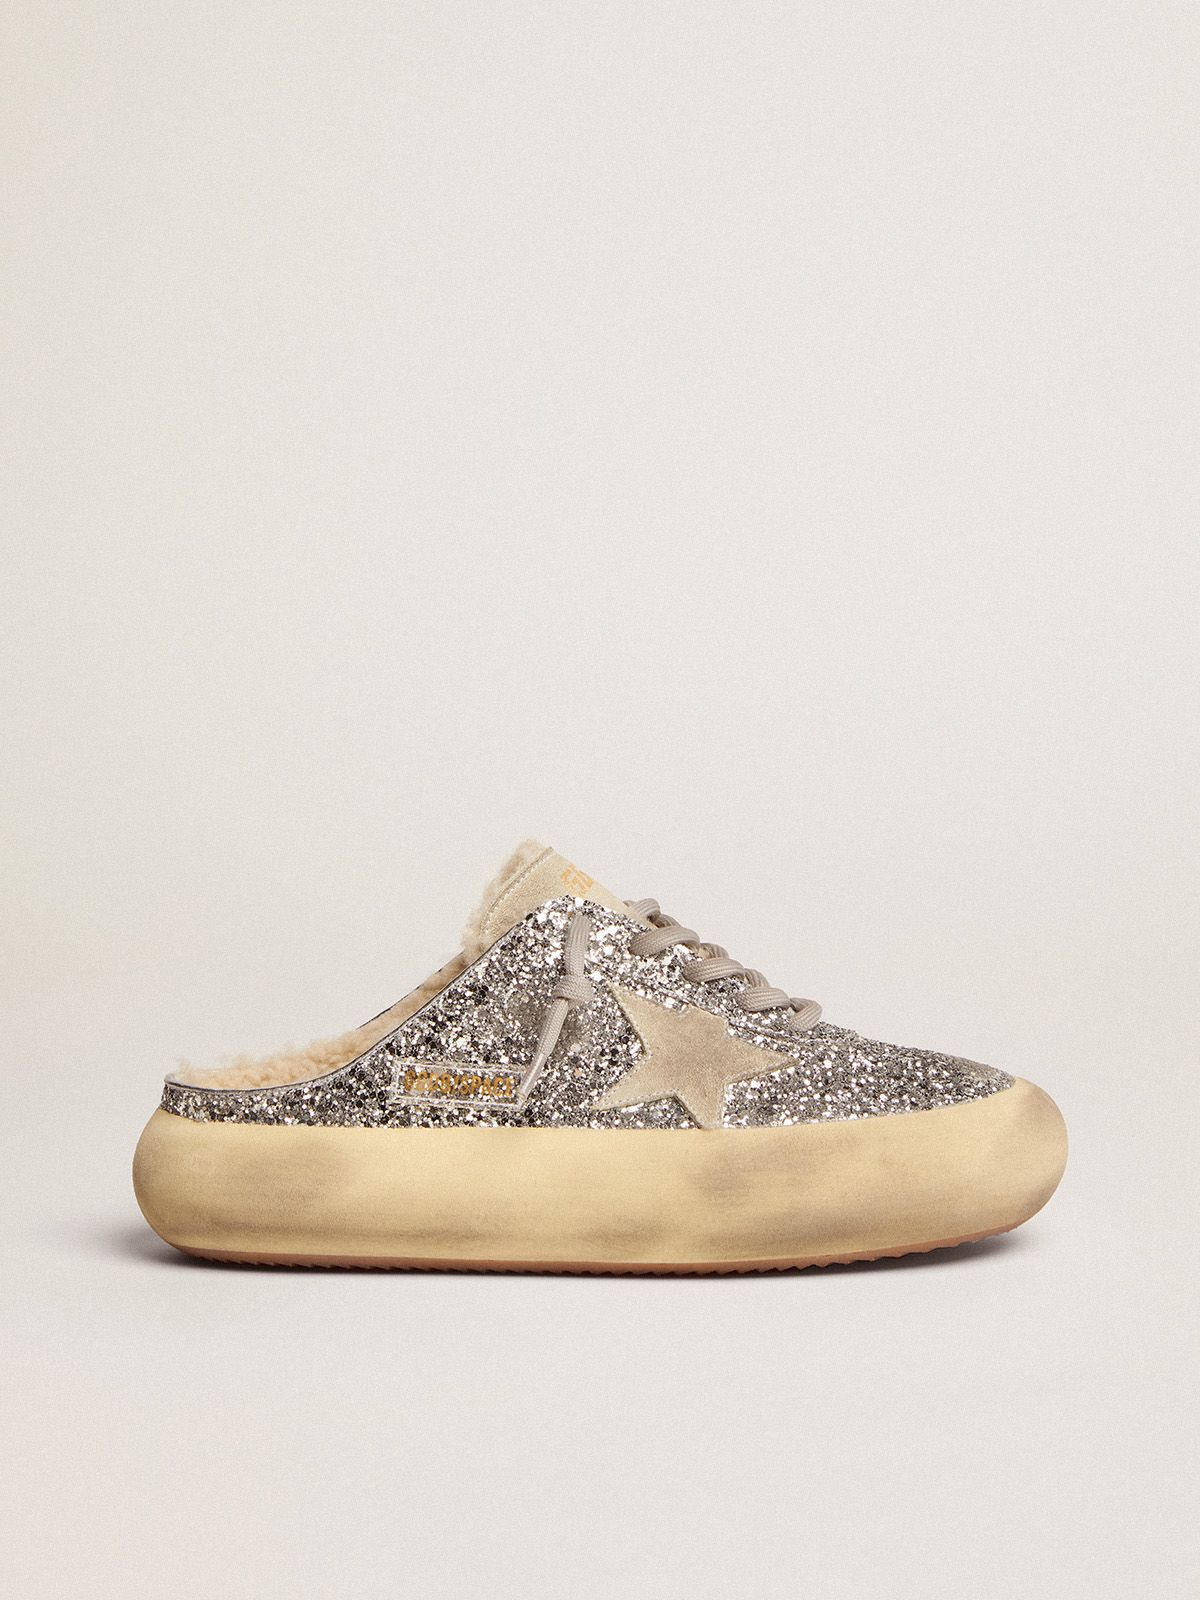 Space-Star Sabot shoes in silver glitter with shearling lining | 